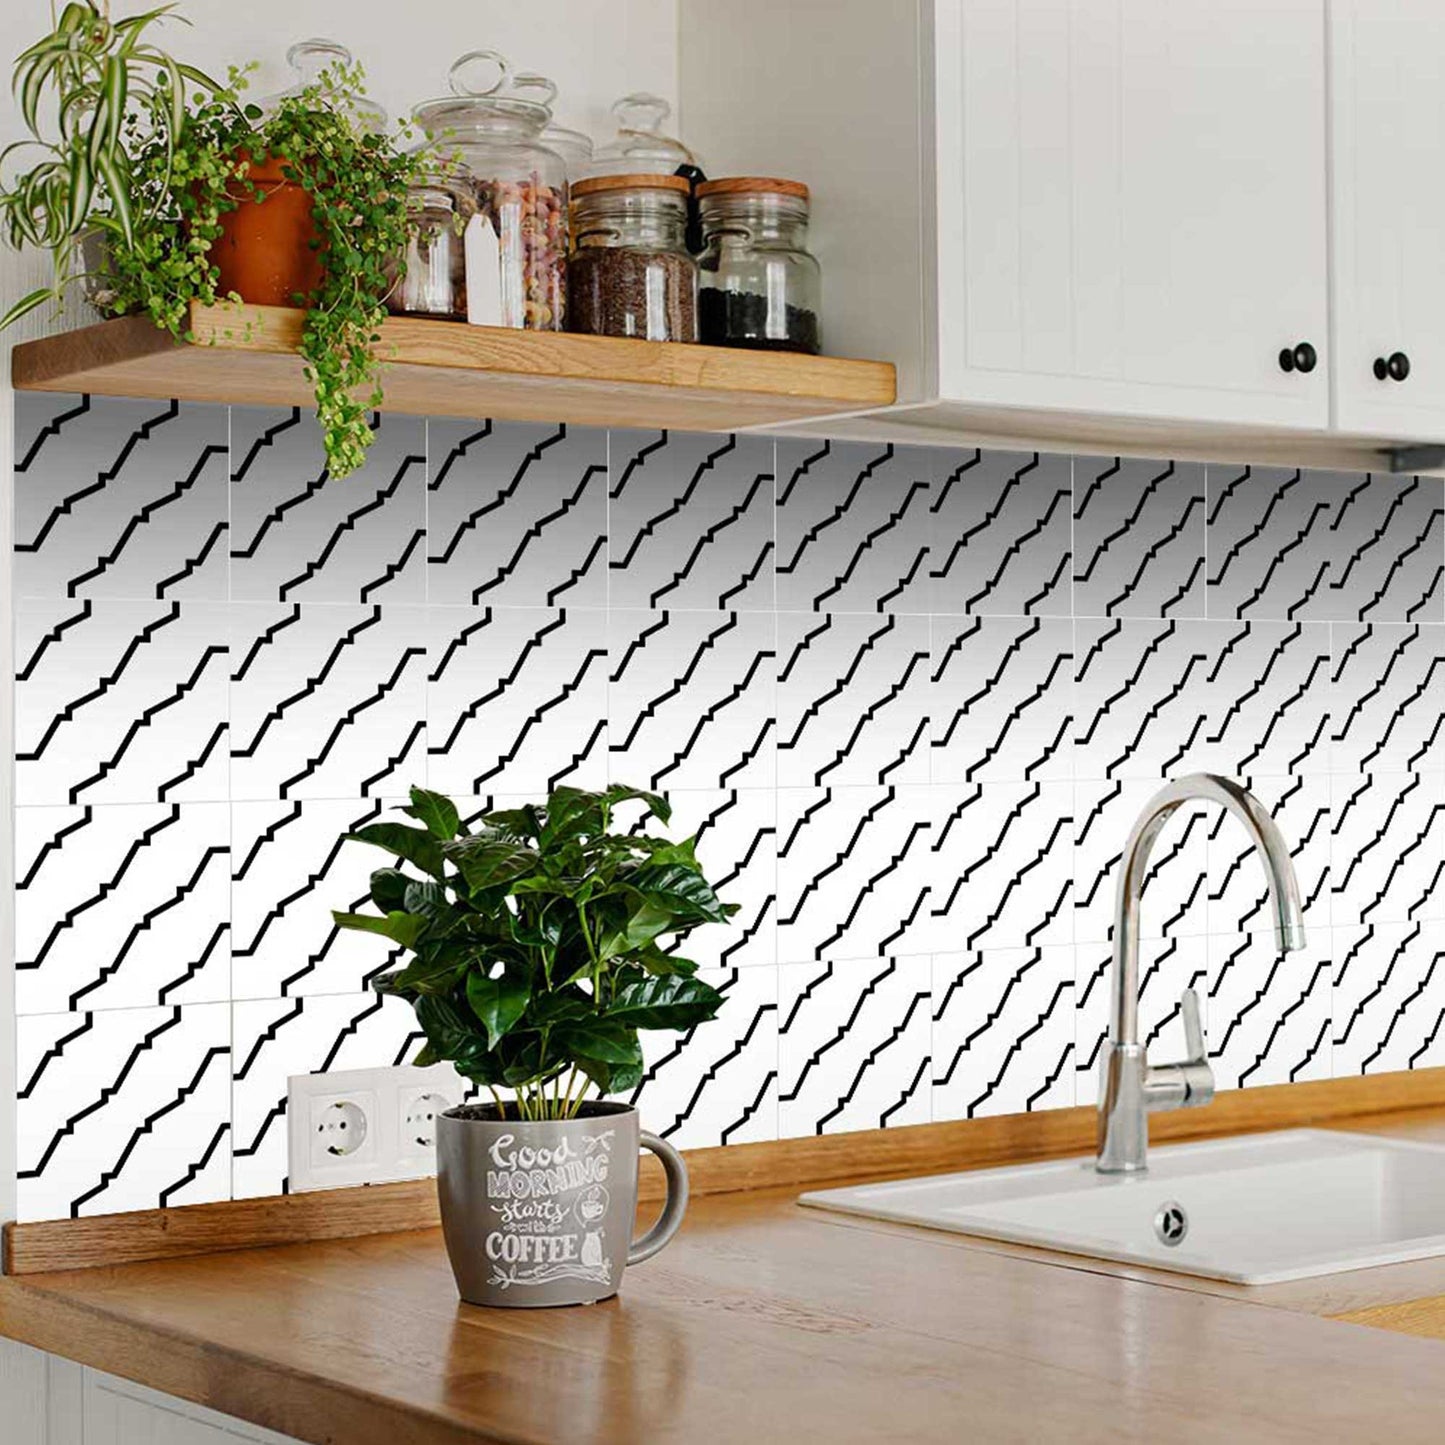 8" X 8" Black and White XL Prism  Peel and Stick Removable Tiles